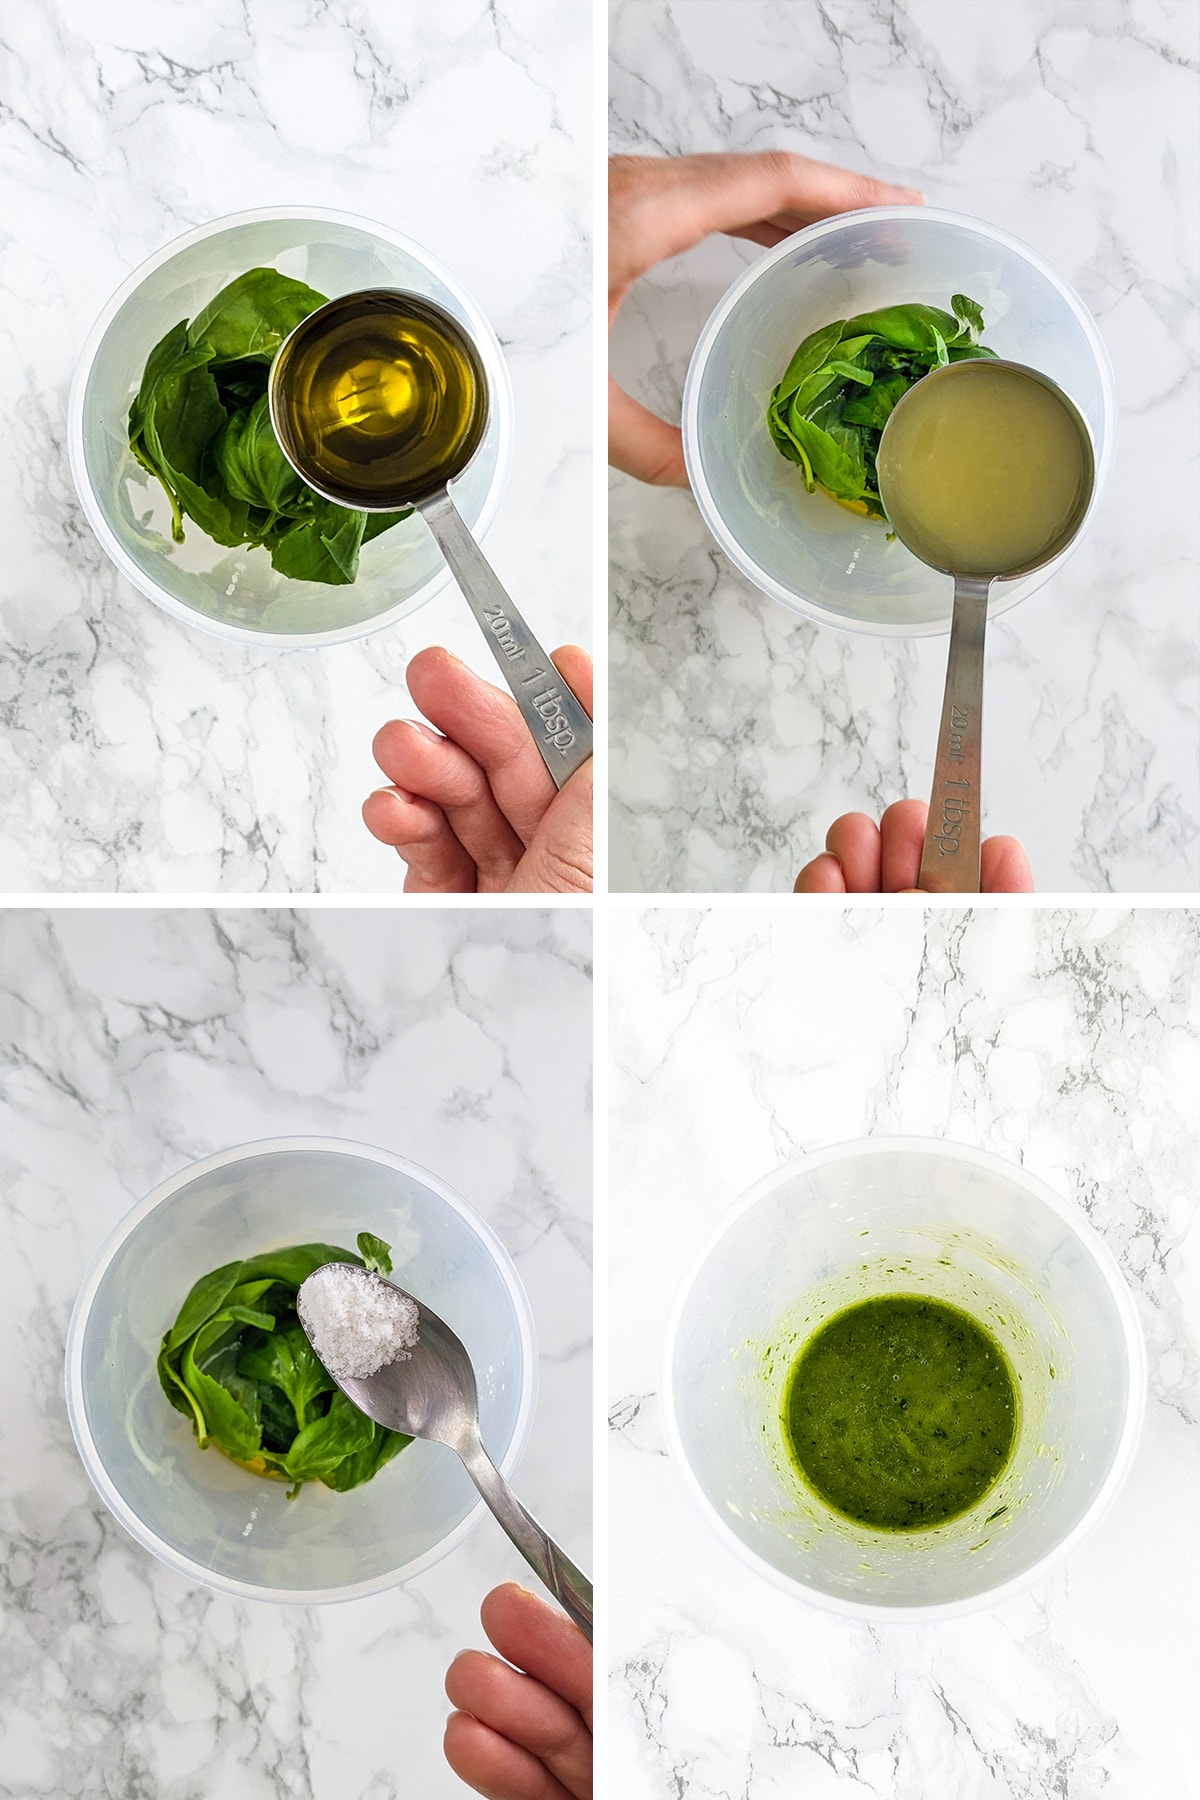 Step-by-step how to make the pesto sauce.